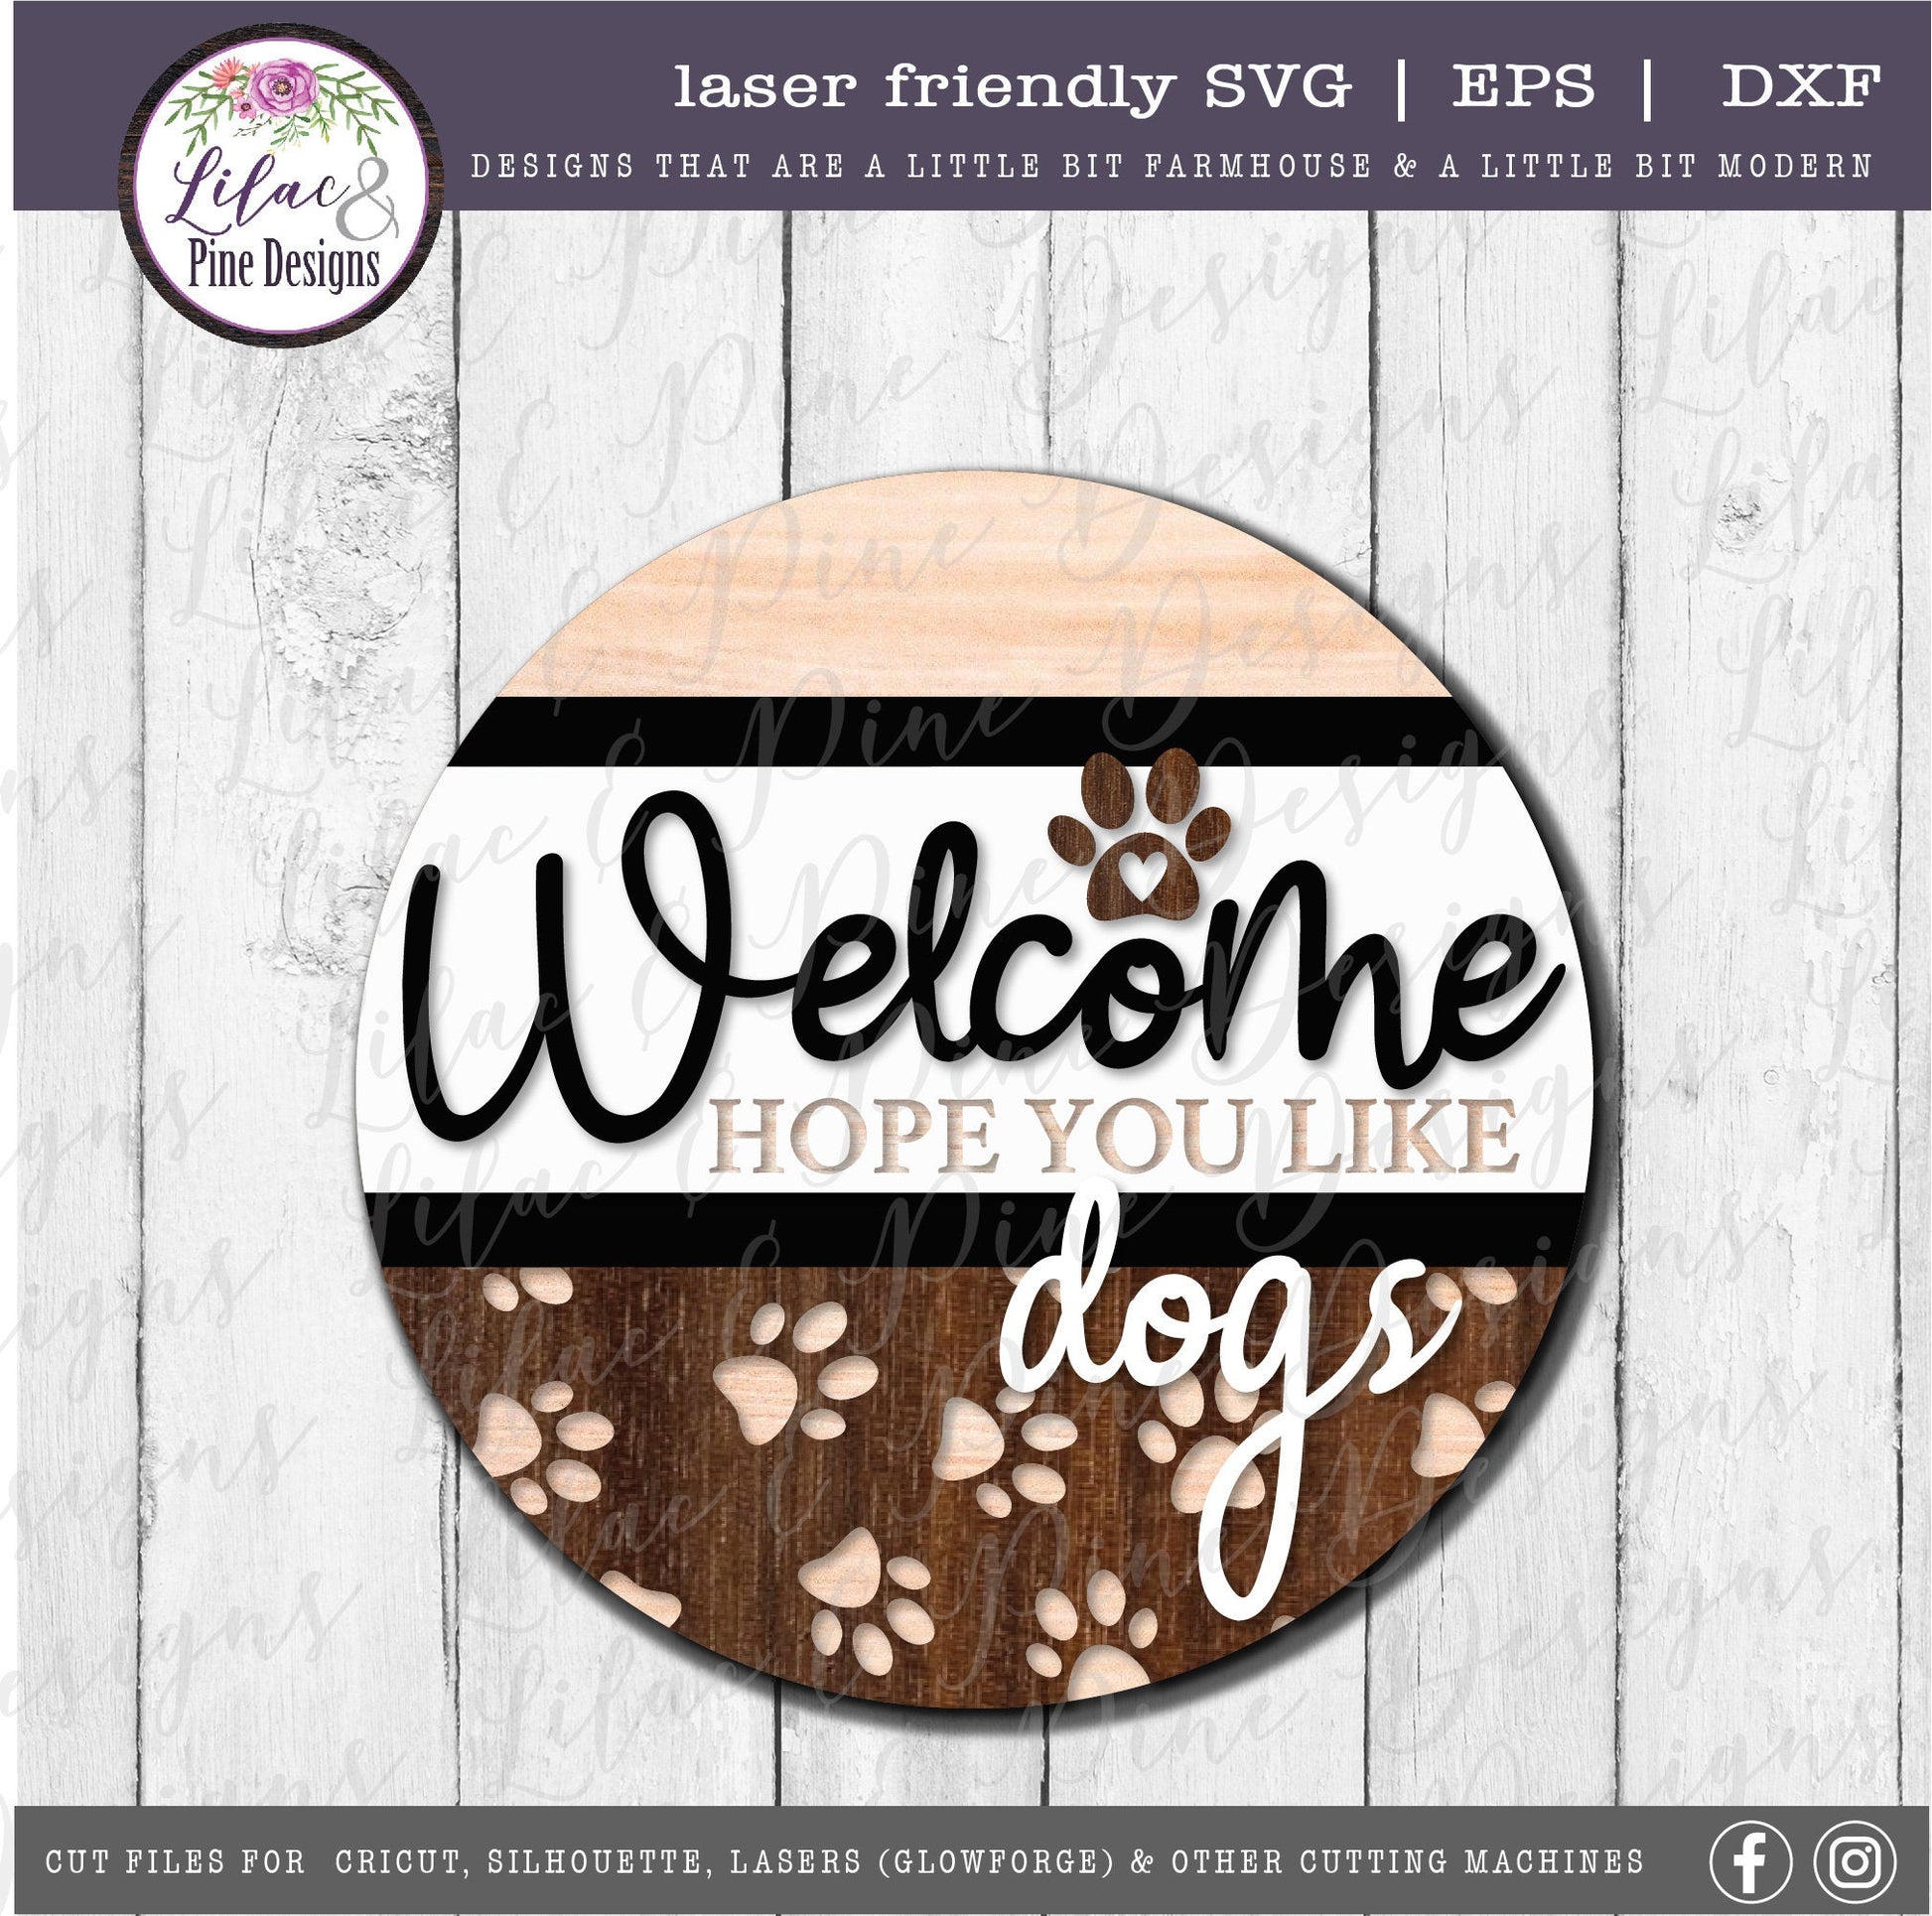 Welcome hope you like dogs sign, Dog lover SVG, Welcome SVG, front door decor, round wood sign, paw print, Glowforge Svg, laser cut file